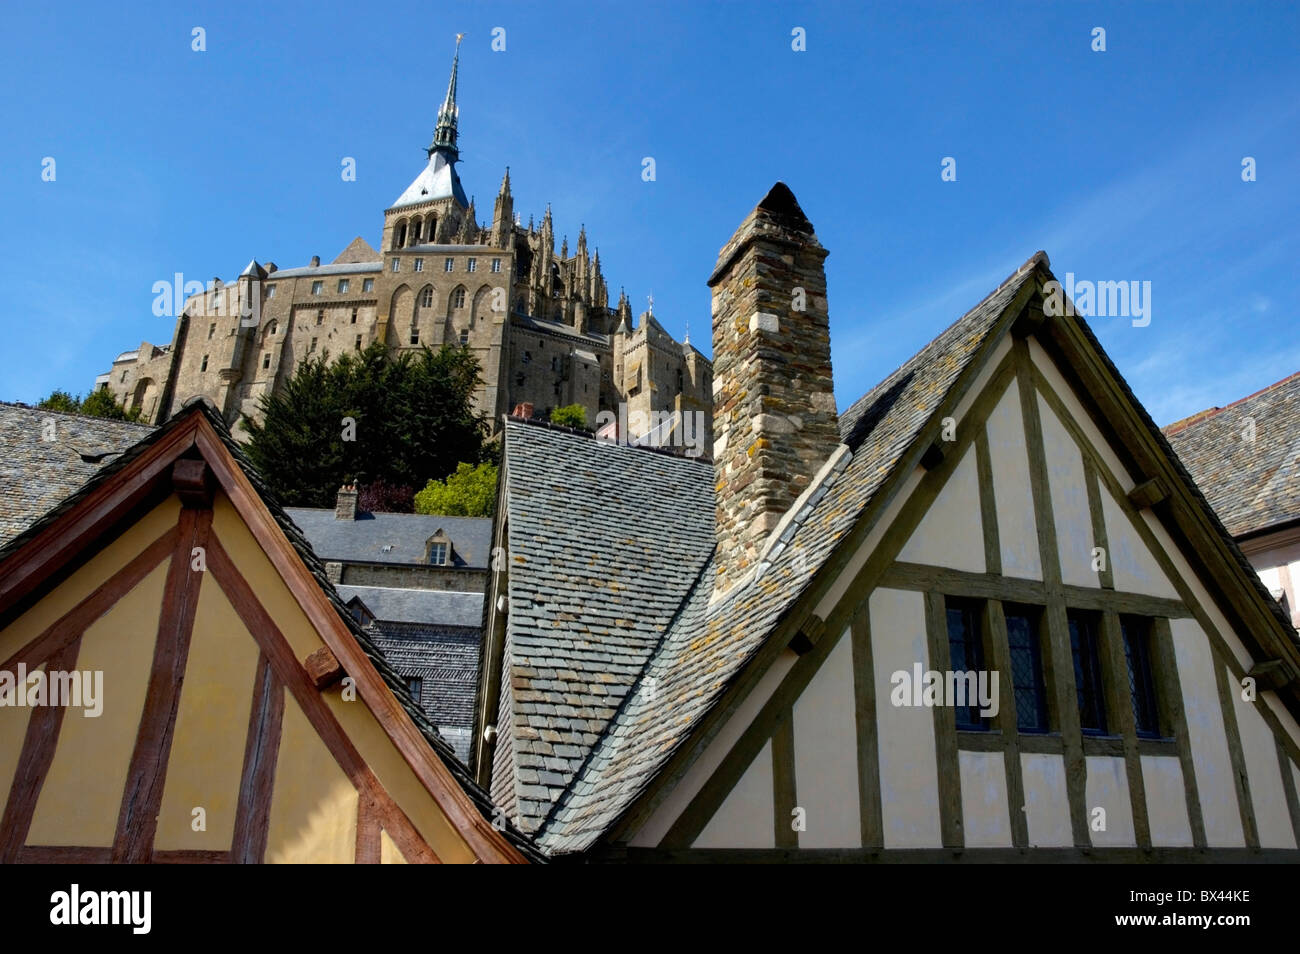 Typical houses in the old city surrounding Mont Saint-Michel, a fortified medieval monastery on an island in Normandy, France. Stock Photo